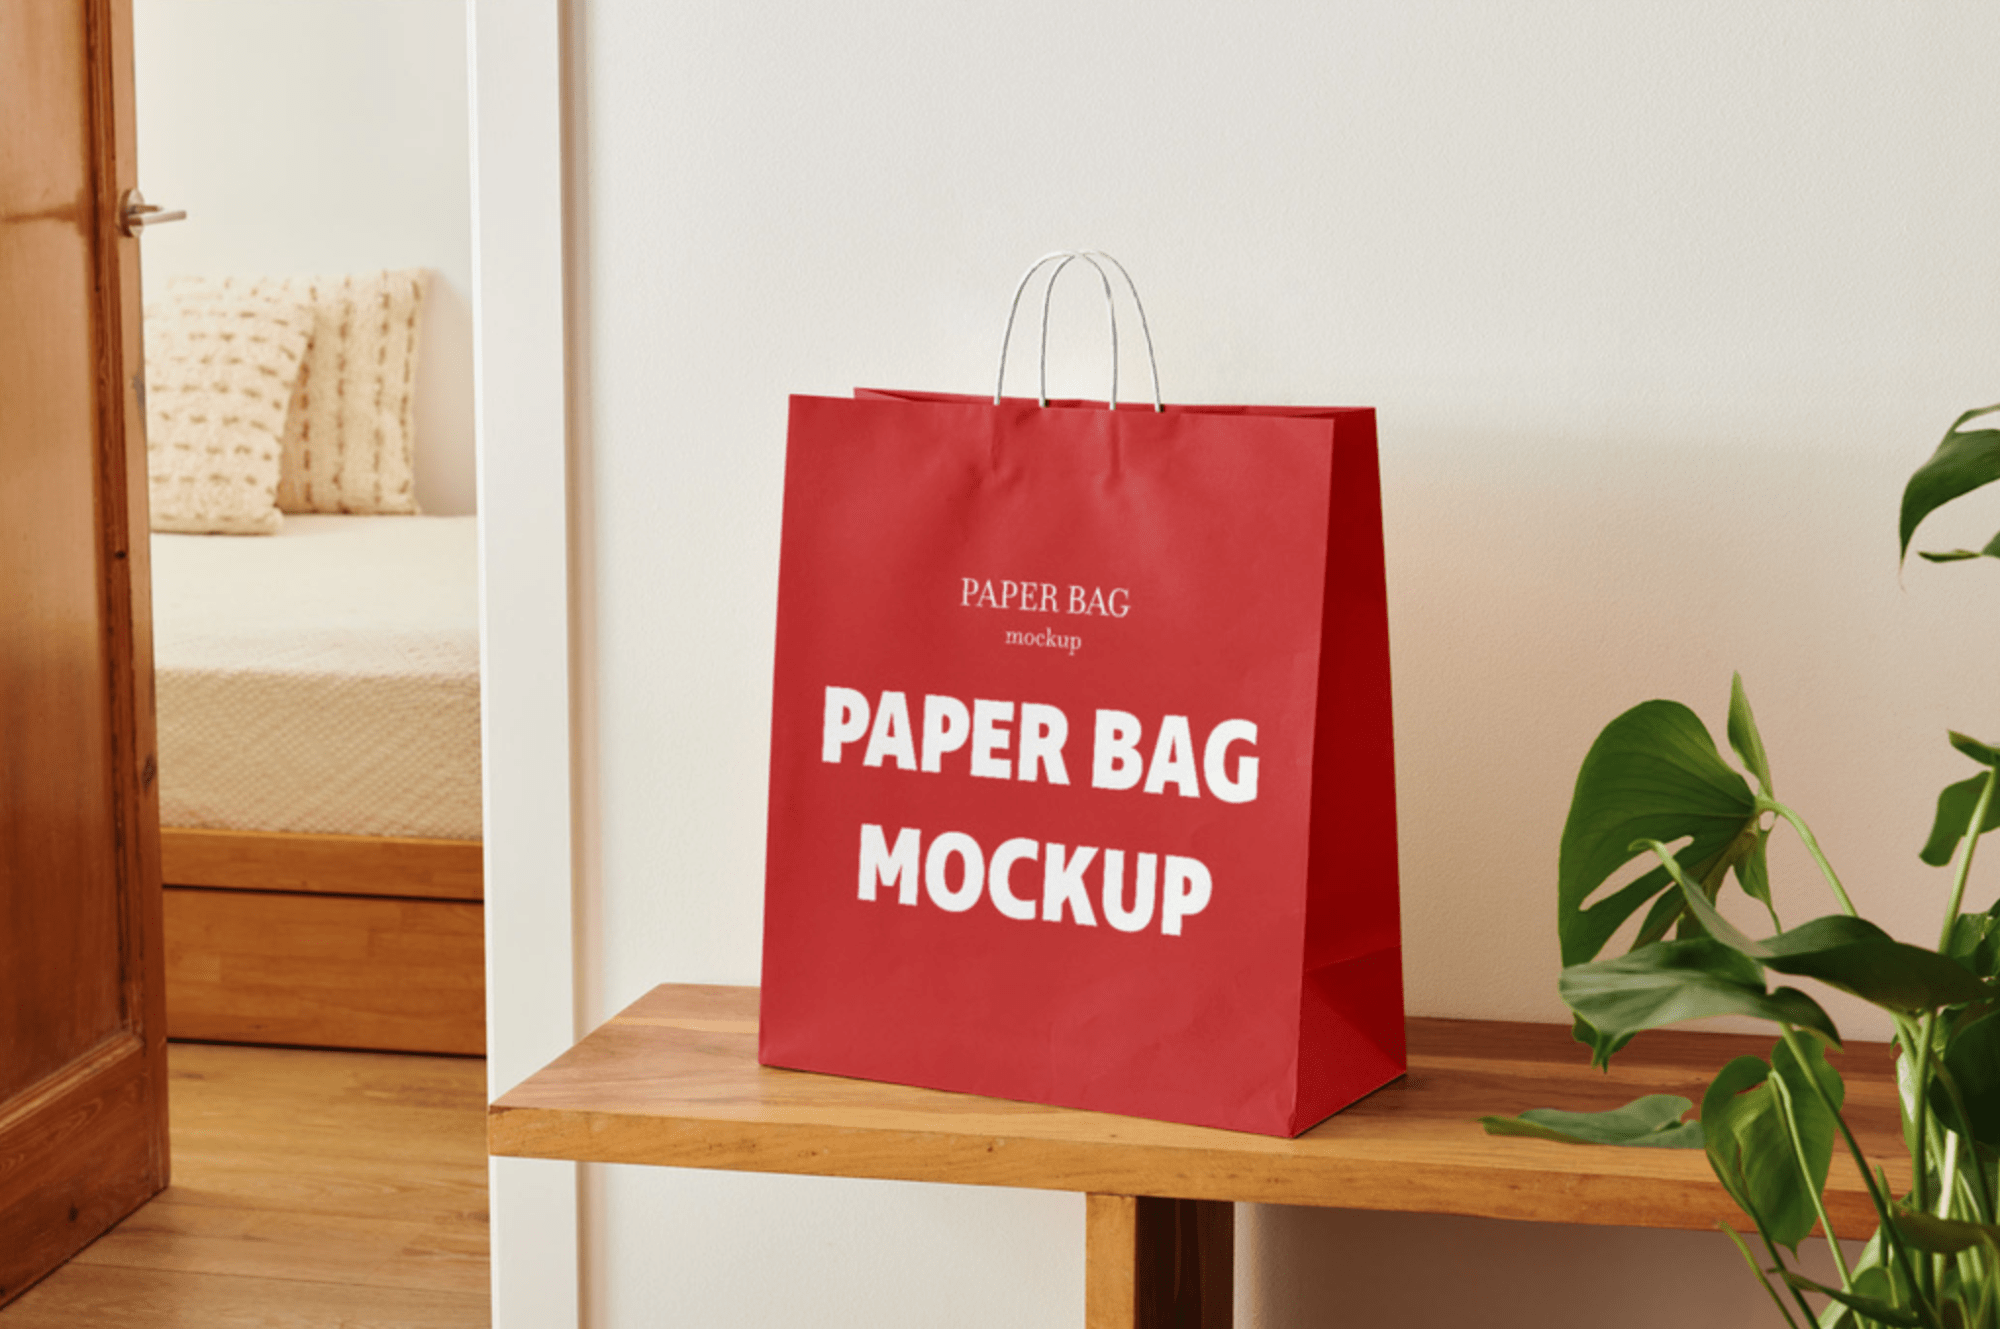 Red paper shopping bag mockup placed on a wooden bench with a white wall background and a green plant to the side.